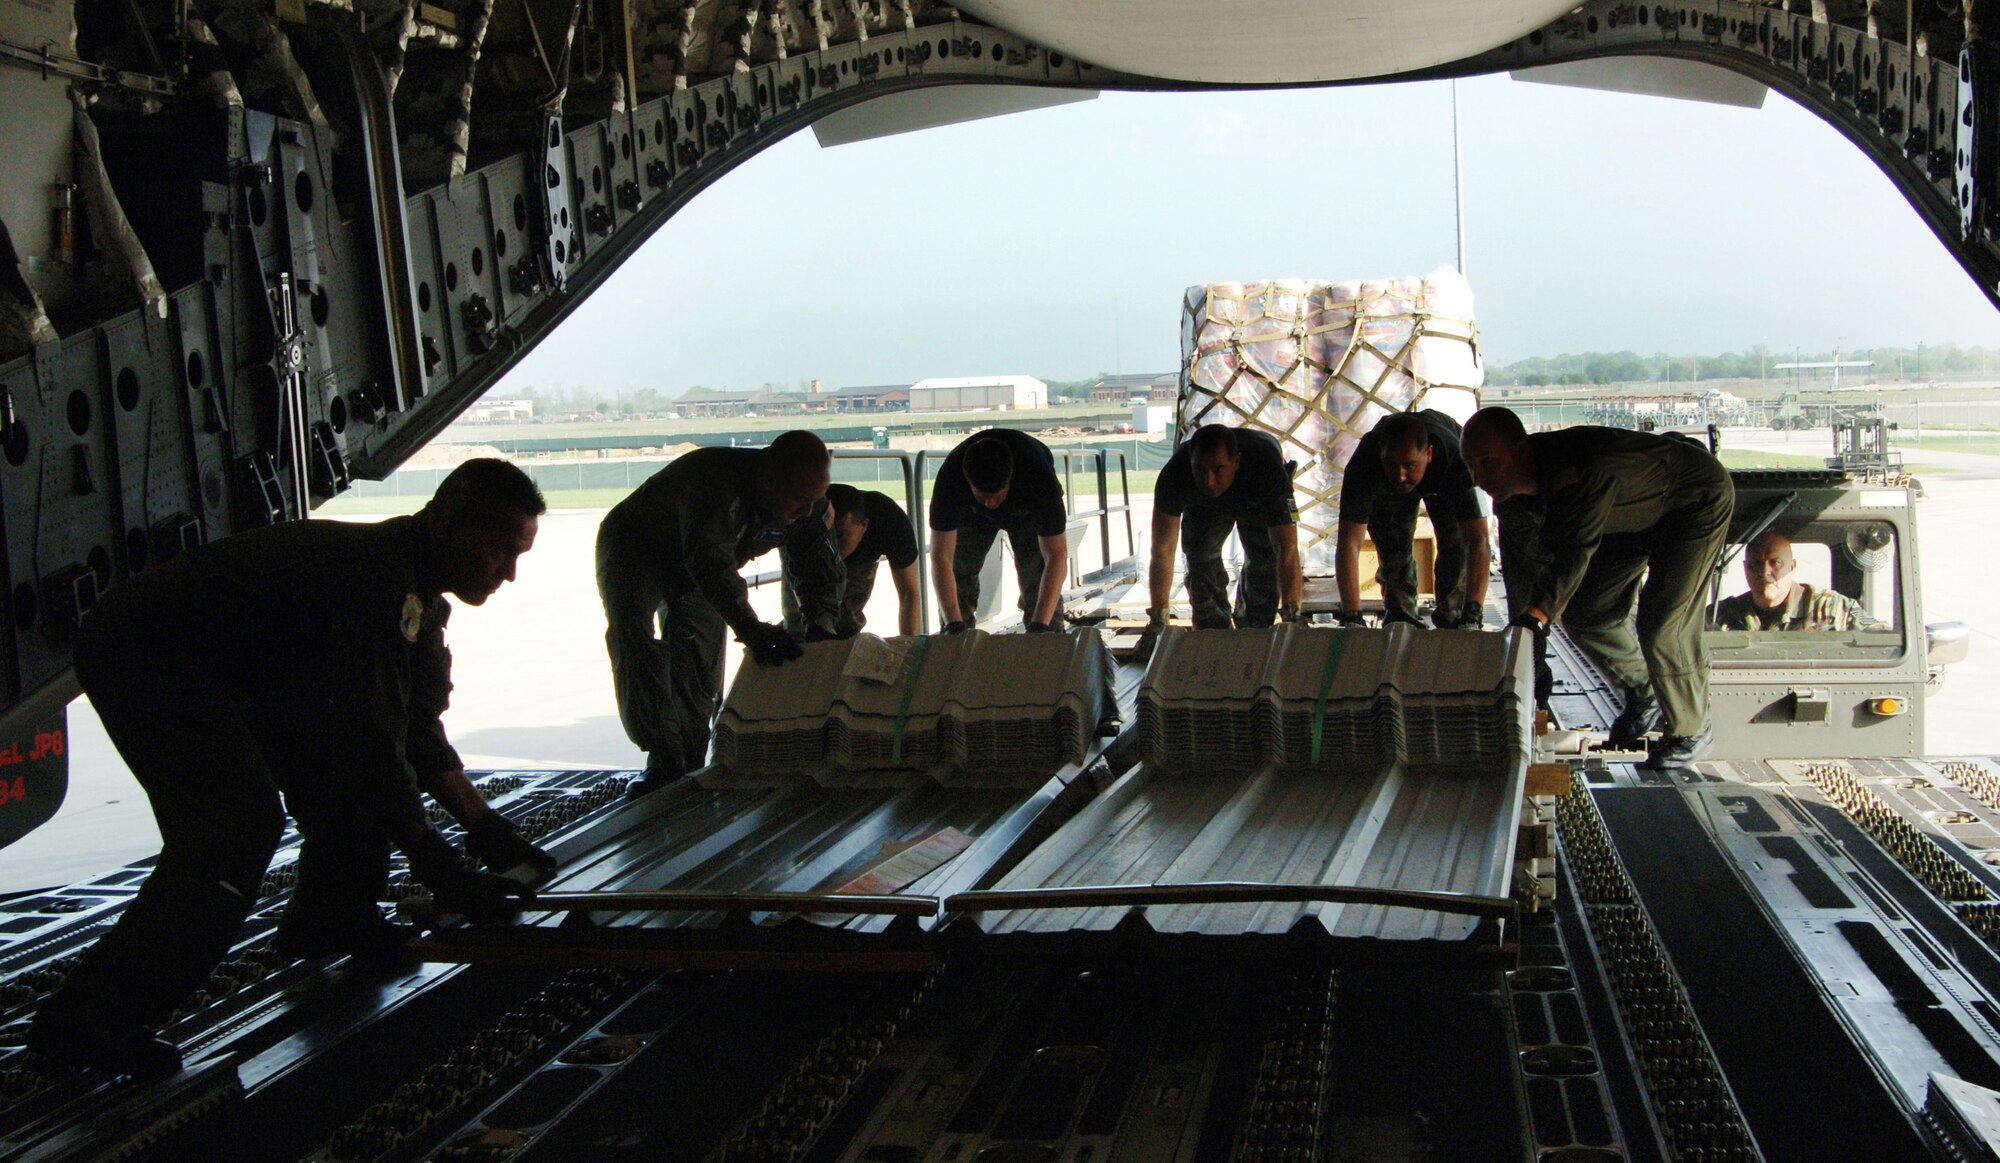 Airmen from the 300th Airlift Squadron at Charleston Air Force Base, S.C., and the 433rd Civil Engineer Squadron at Lackland AFB, Texas, load cargo for transport to Saint Lucia Friday, April 7, 2006. The aircrew was delivering construction materials and Reserve civil engineers who are building an operations center and barracks for the police force in support of Saint Lucia's counter-drug operations. (U.S. Air Force photo/Tech. Sgt. Larry A. Simmons)